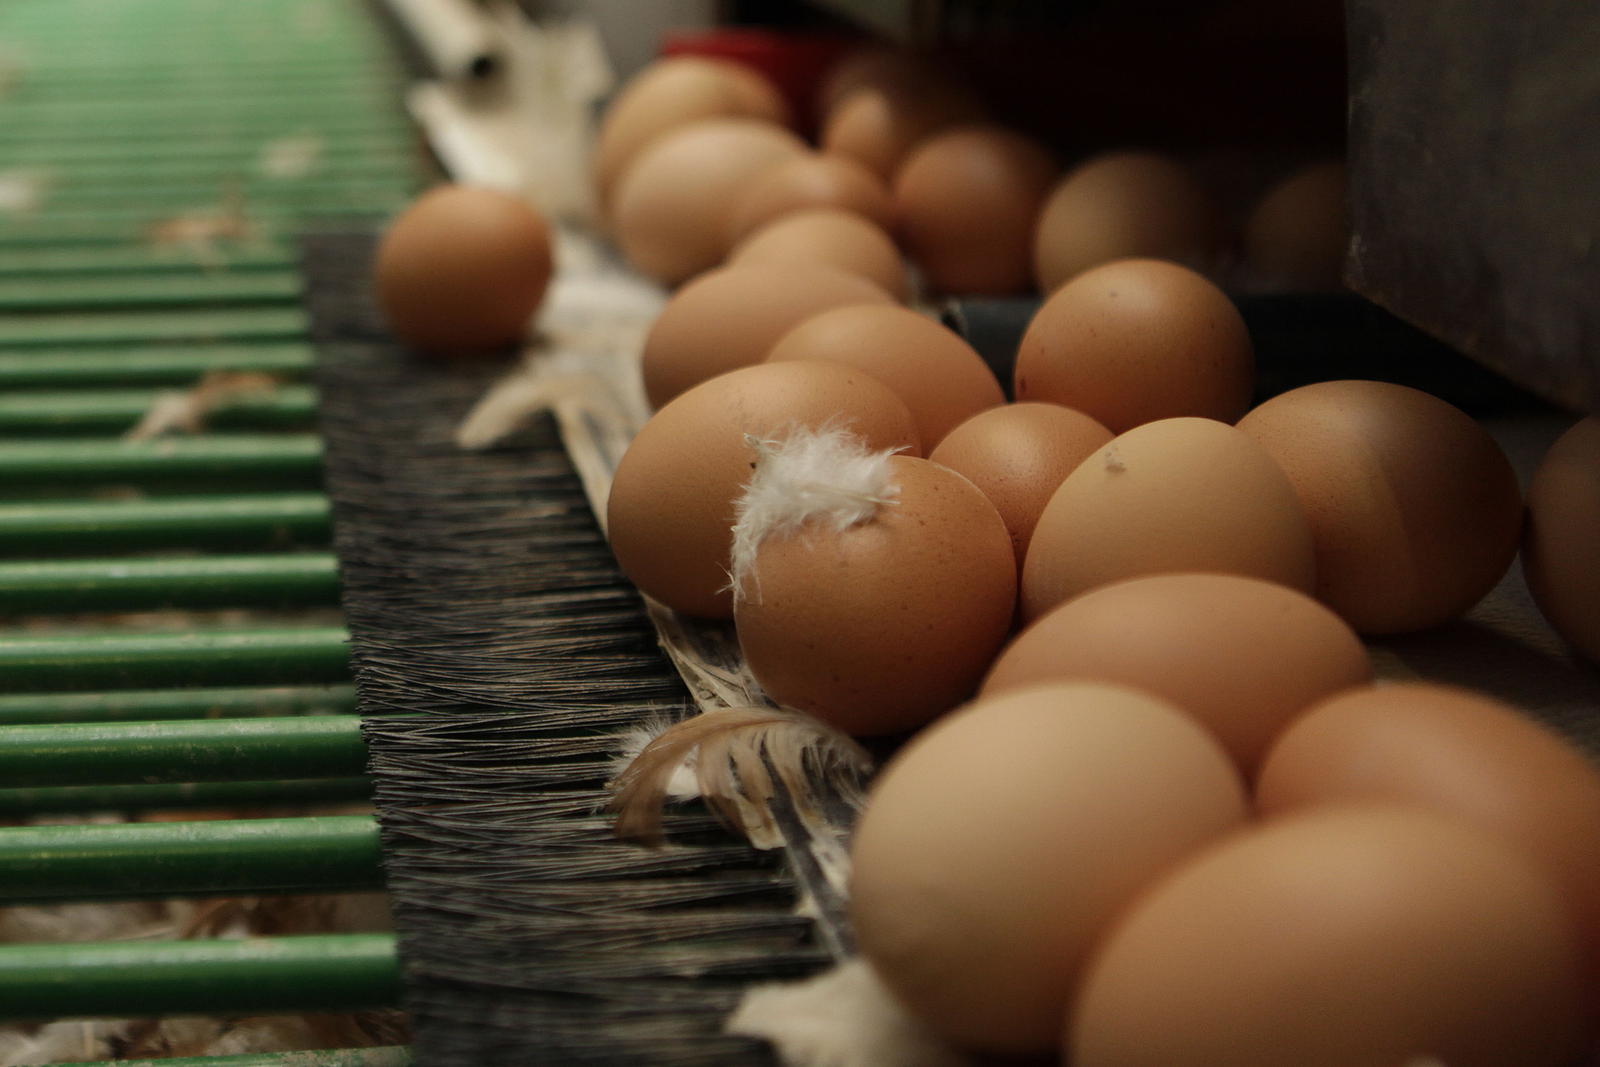 Carotenoids in DDGS oil can add value to eggs